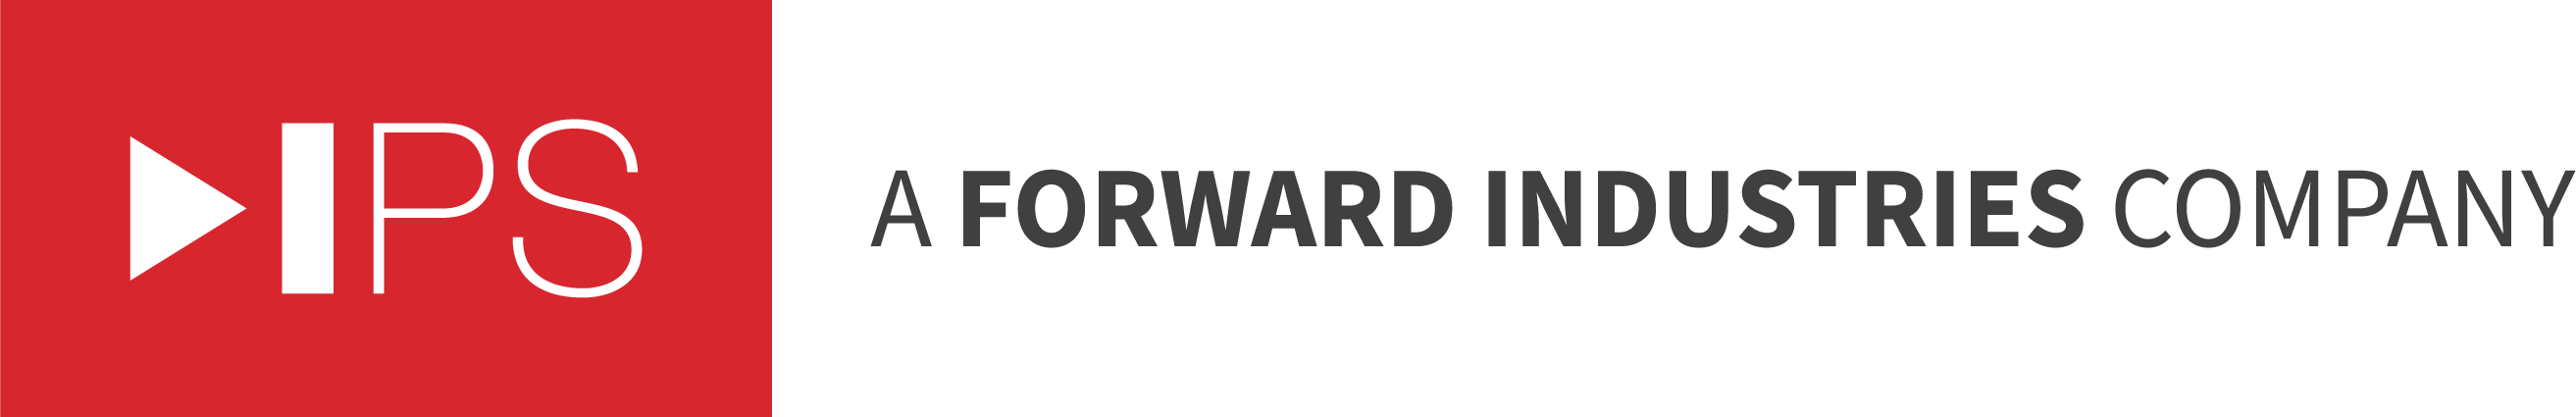 IPS_FWD_Logo-blk-tag.png